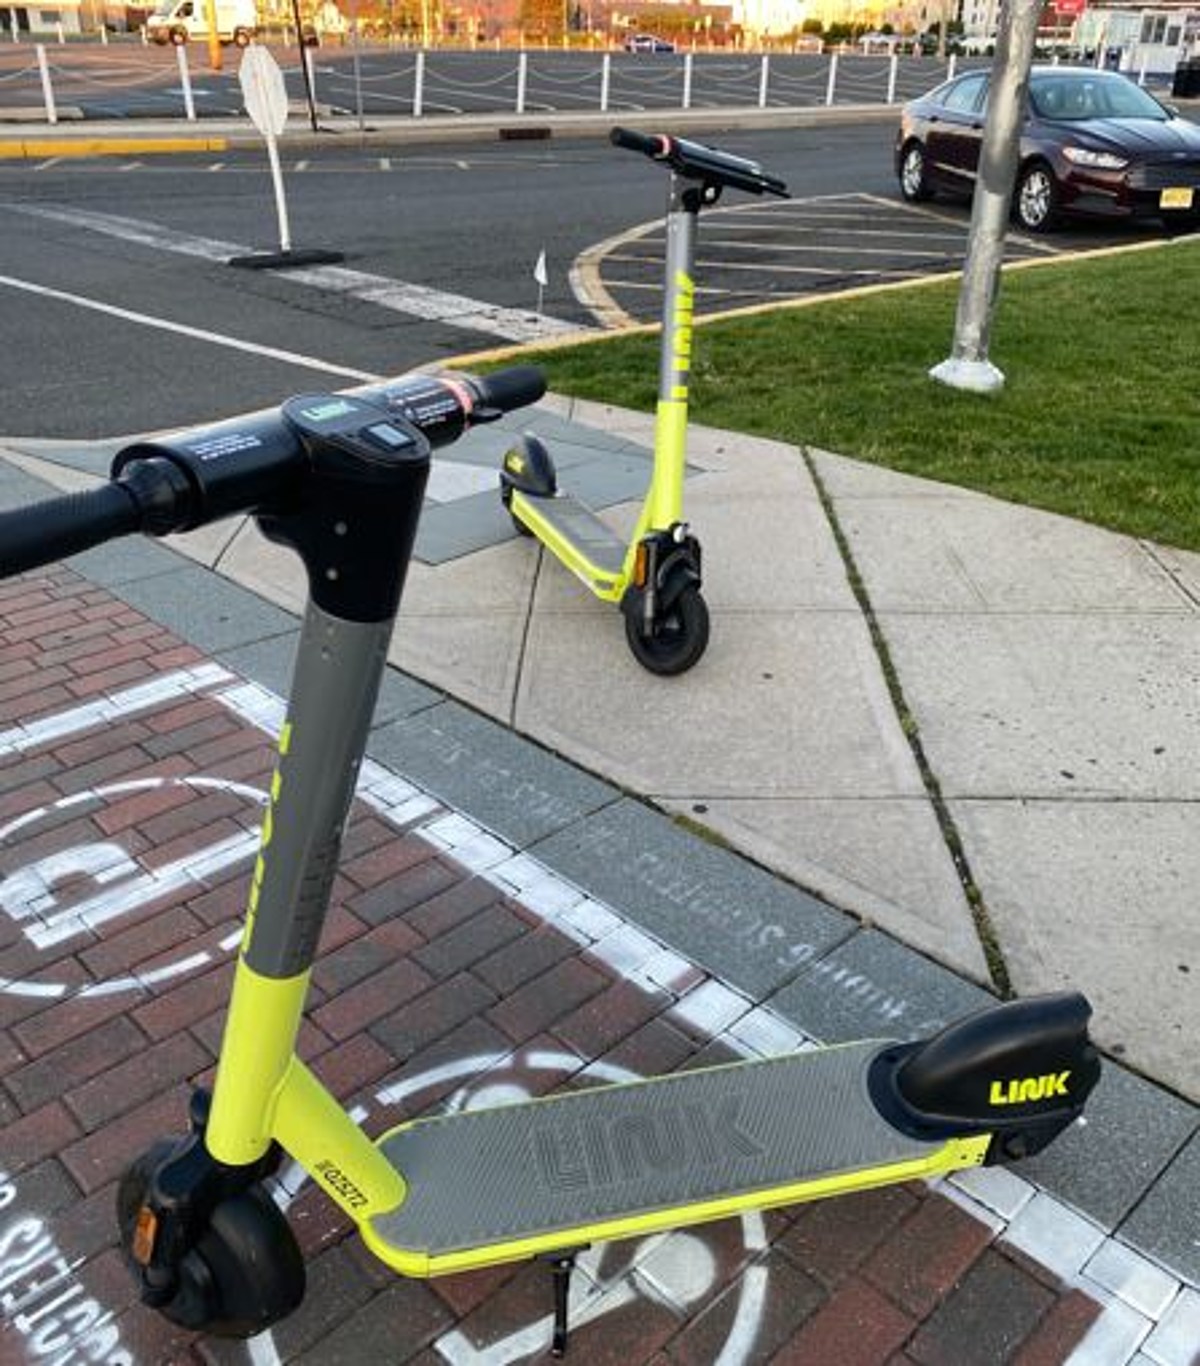 Link Electric Scooter In Asbury Park Are Great For The City!